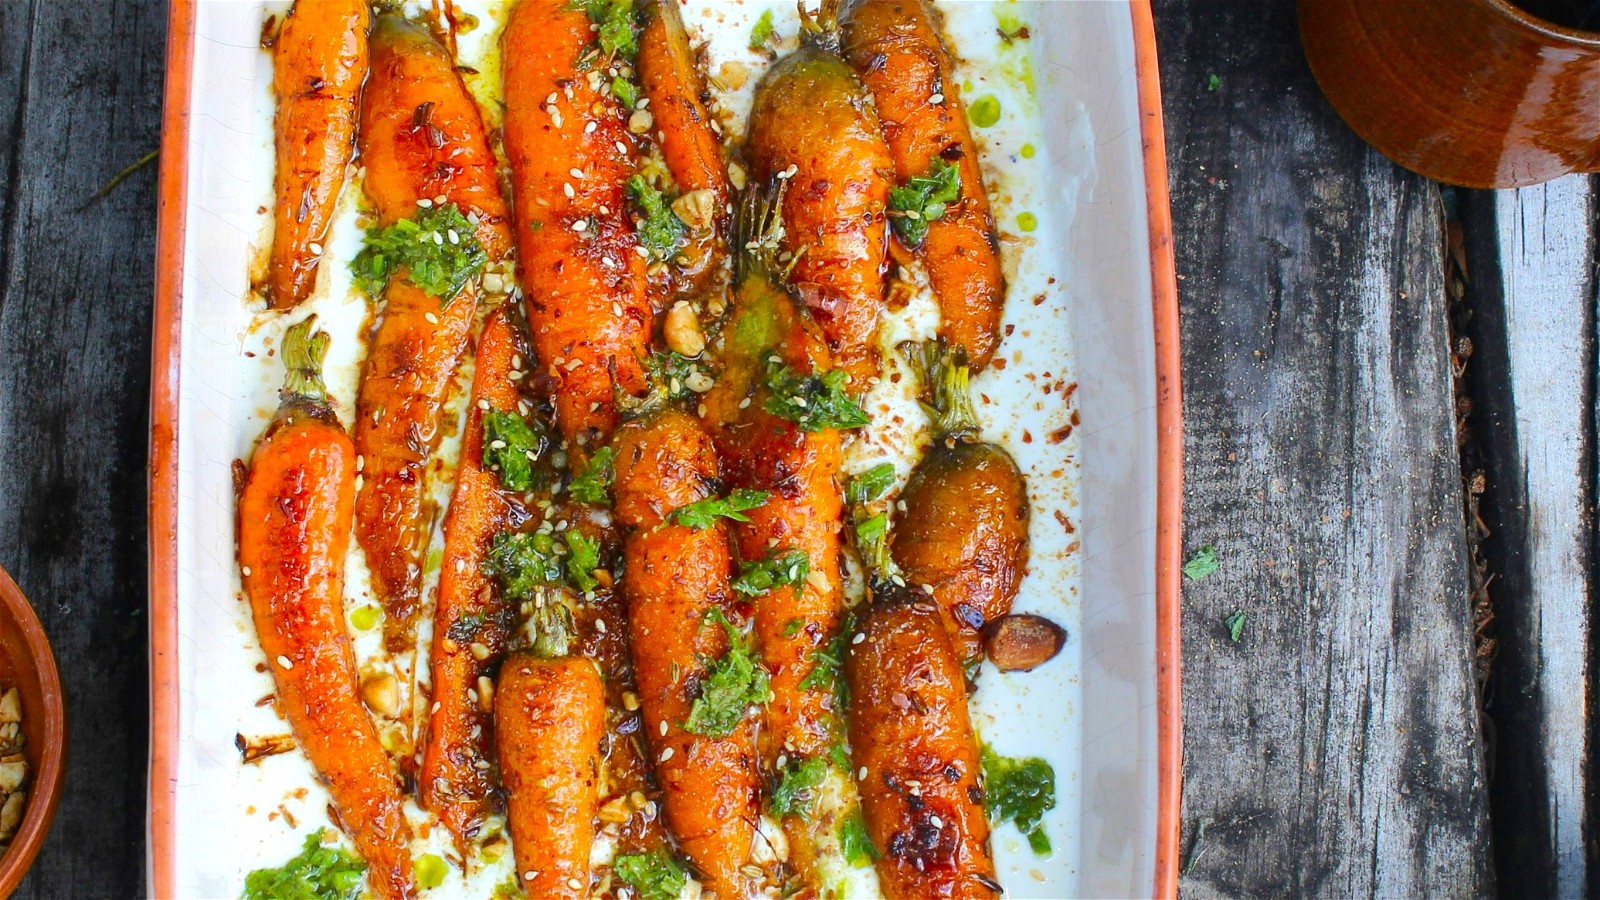 Image of Black Honeyed Carrots with Whipped Feta and Carrot Top Pesto